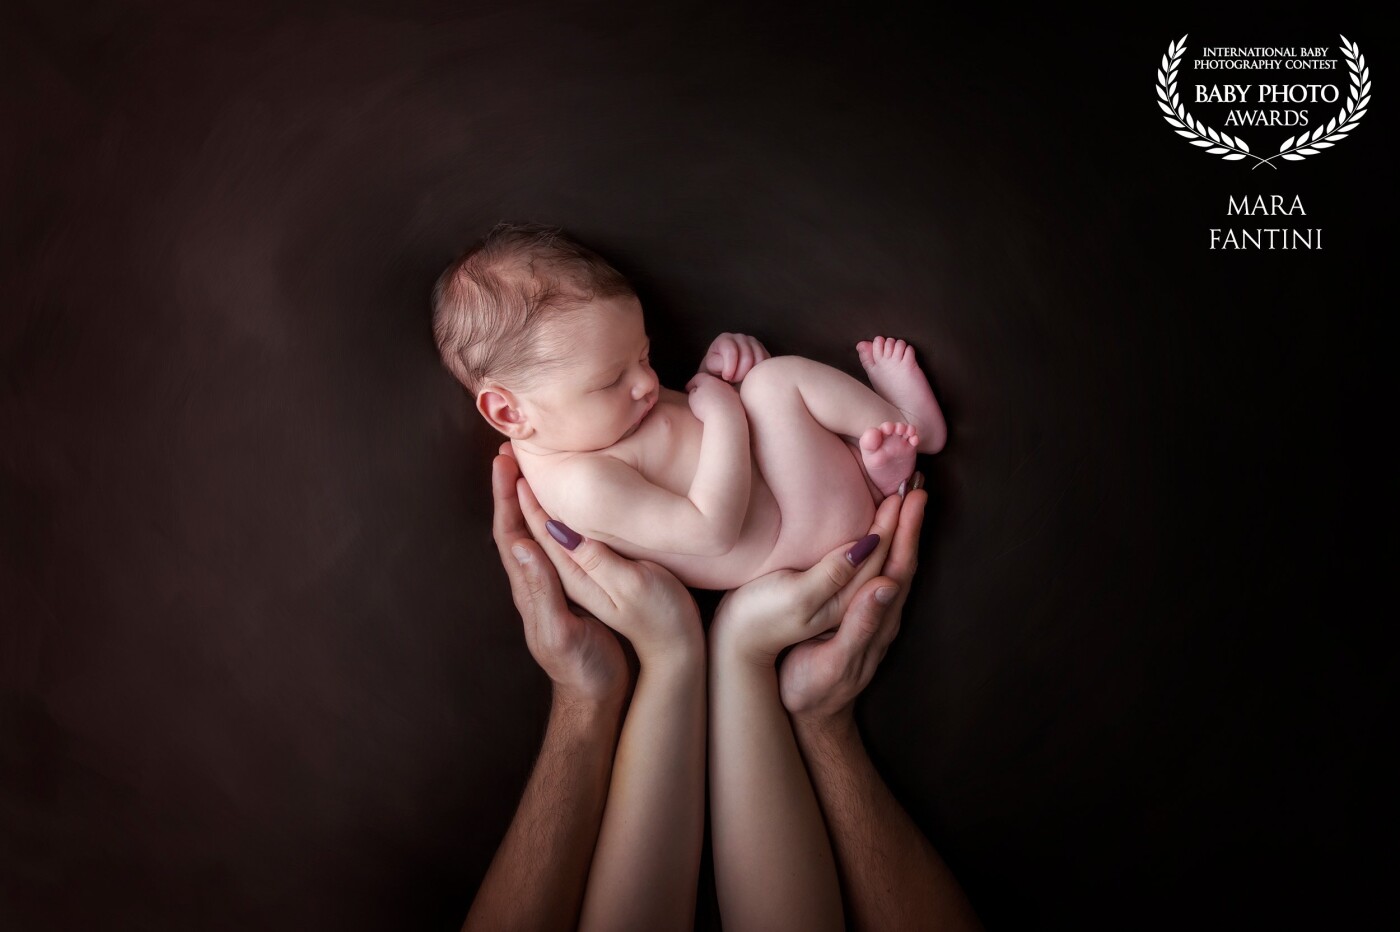 This little guy, was soo relaxed and peaceful on parents hands, it was a dream to photograph. Perfect teamwork and a nice and sleepy baby: the perfect home session.